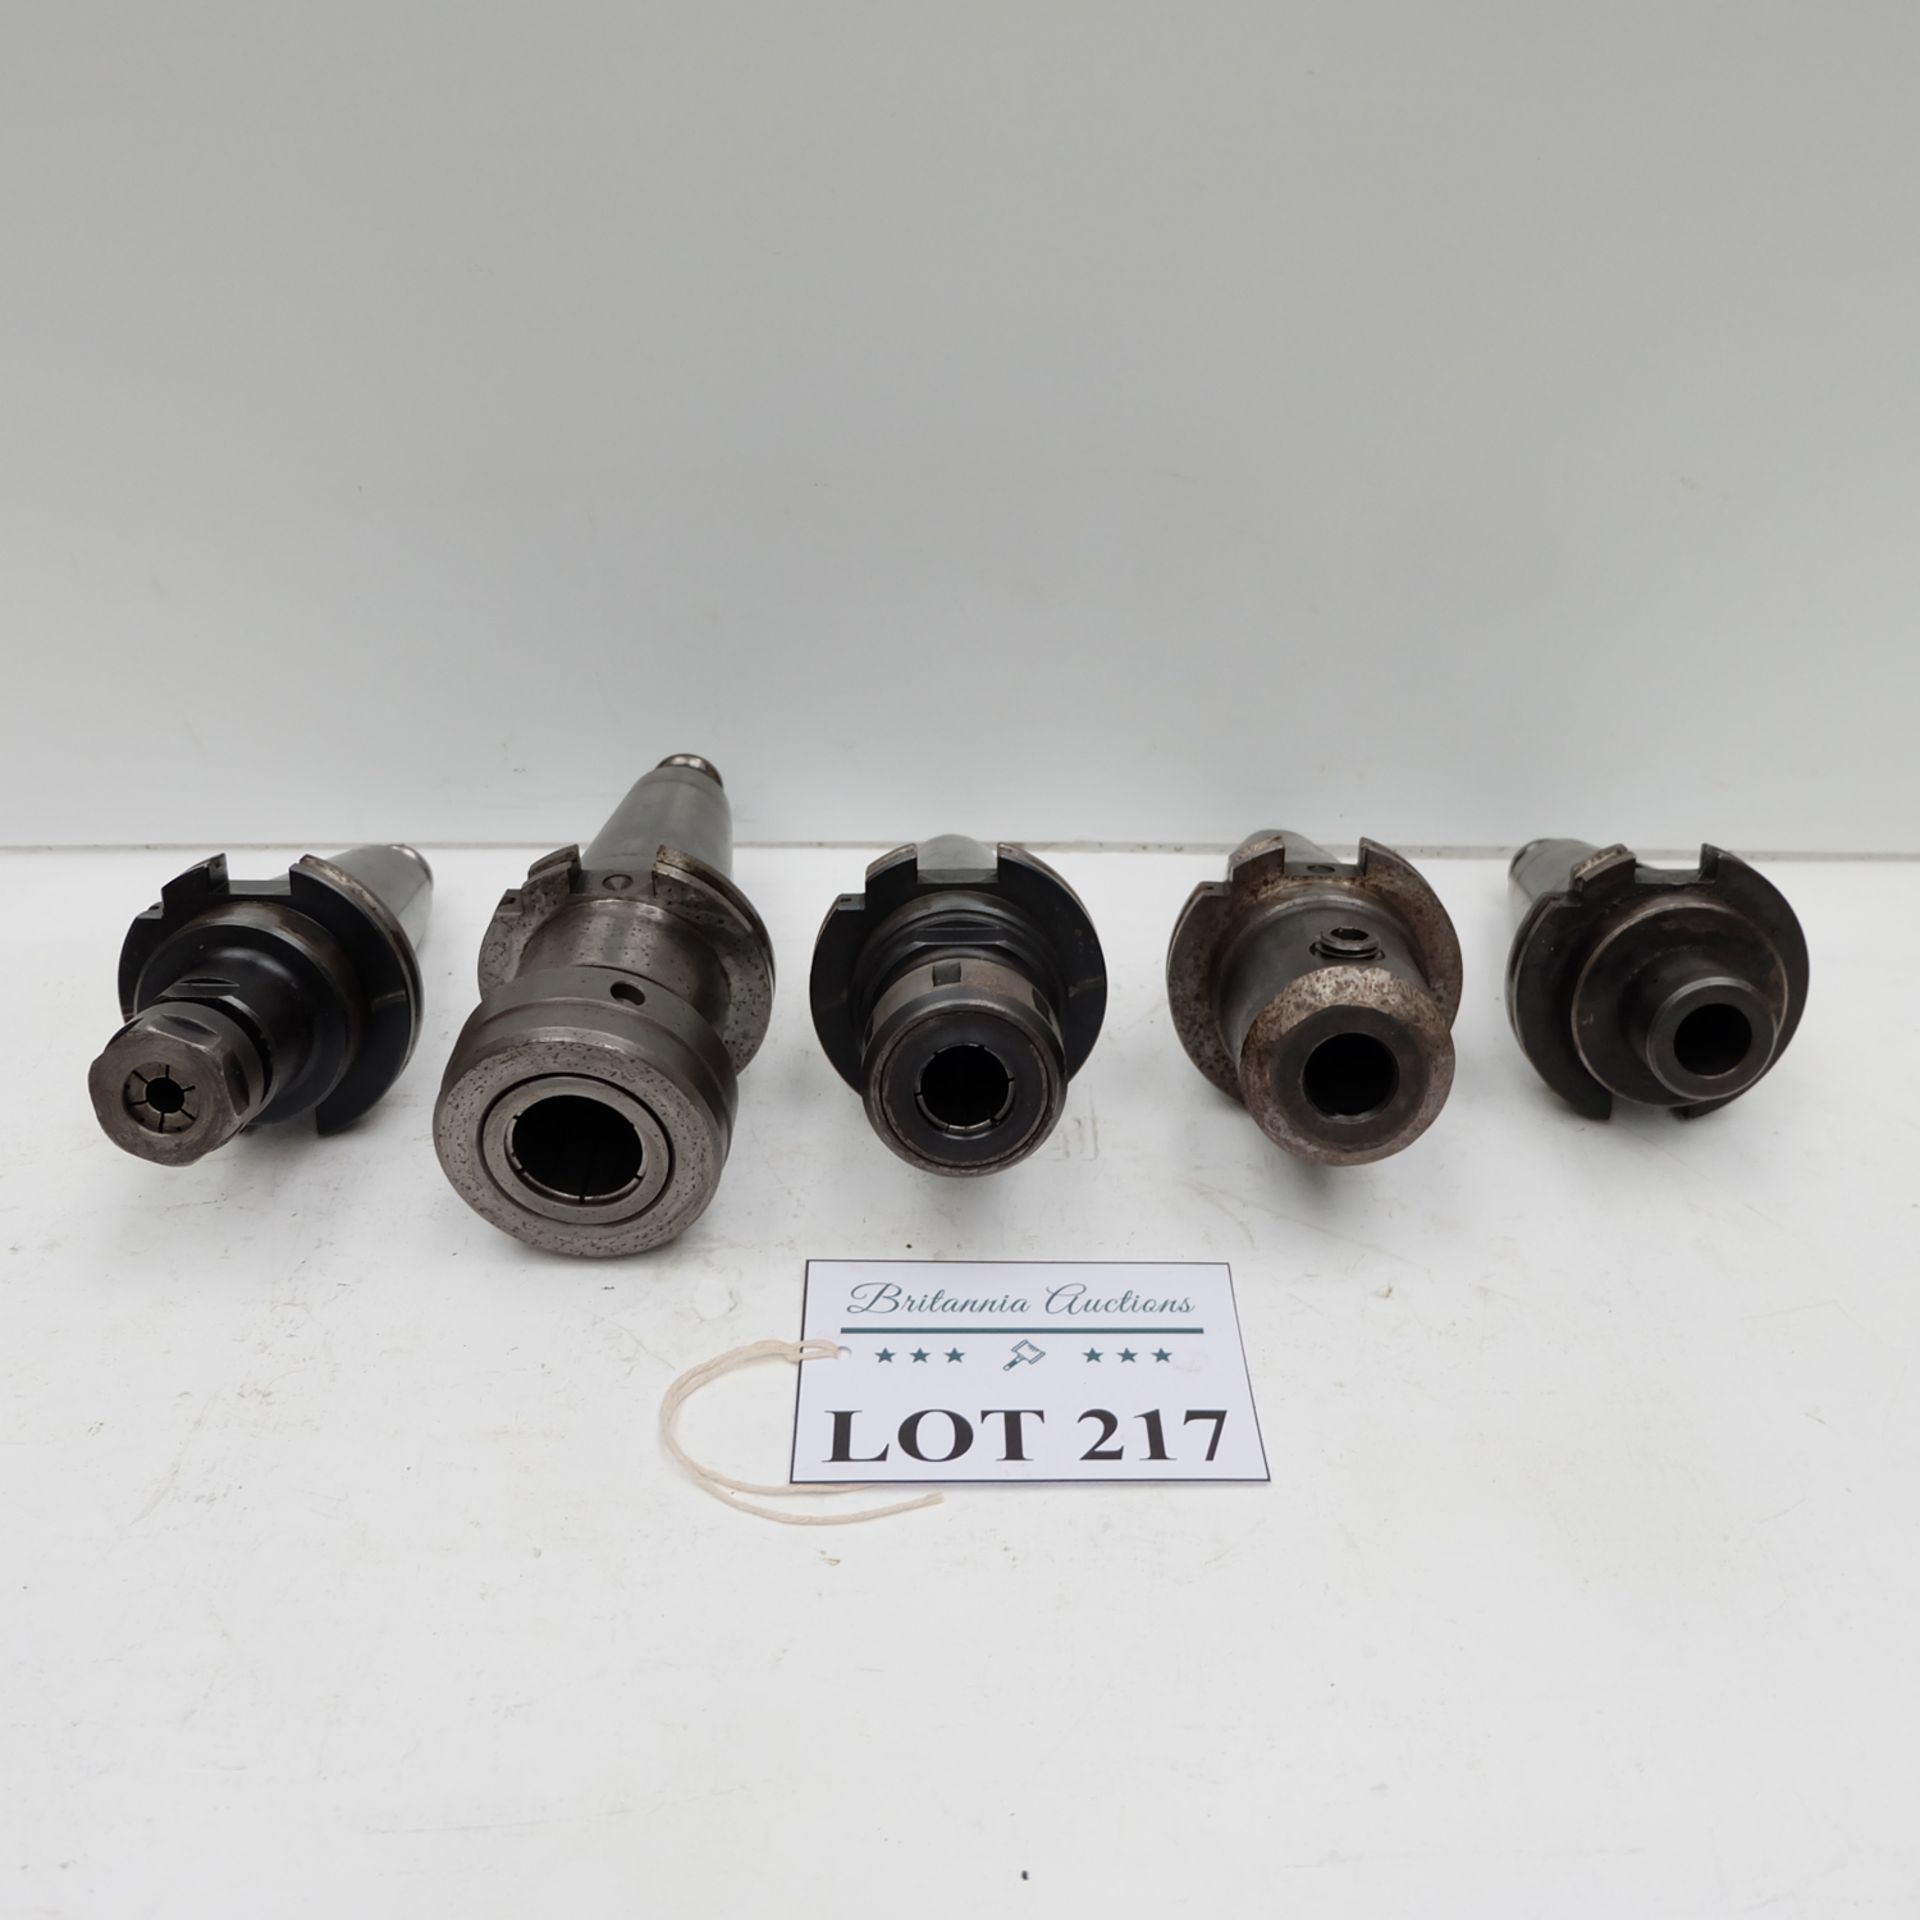 Quantity of 5 x SK 50 Spindle Tooling. - Image 3 of 3